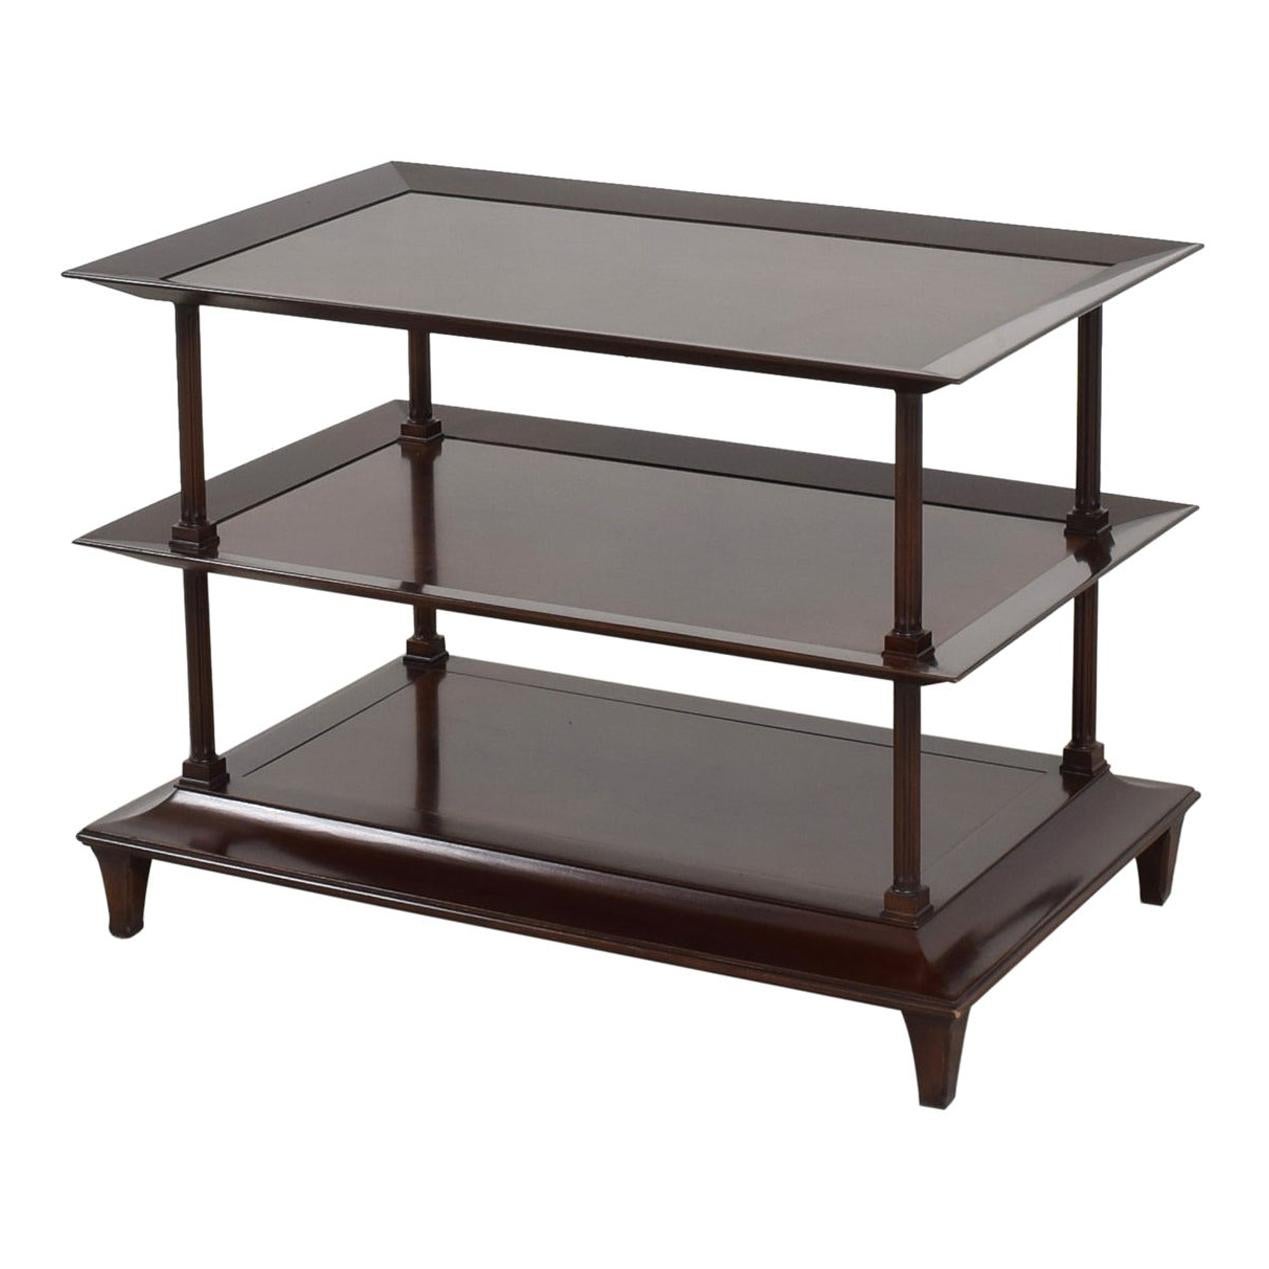 Barbara Berry for Baker Furniture Company, Three-Tiered Mahogany Side End Table